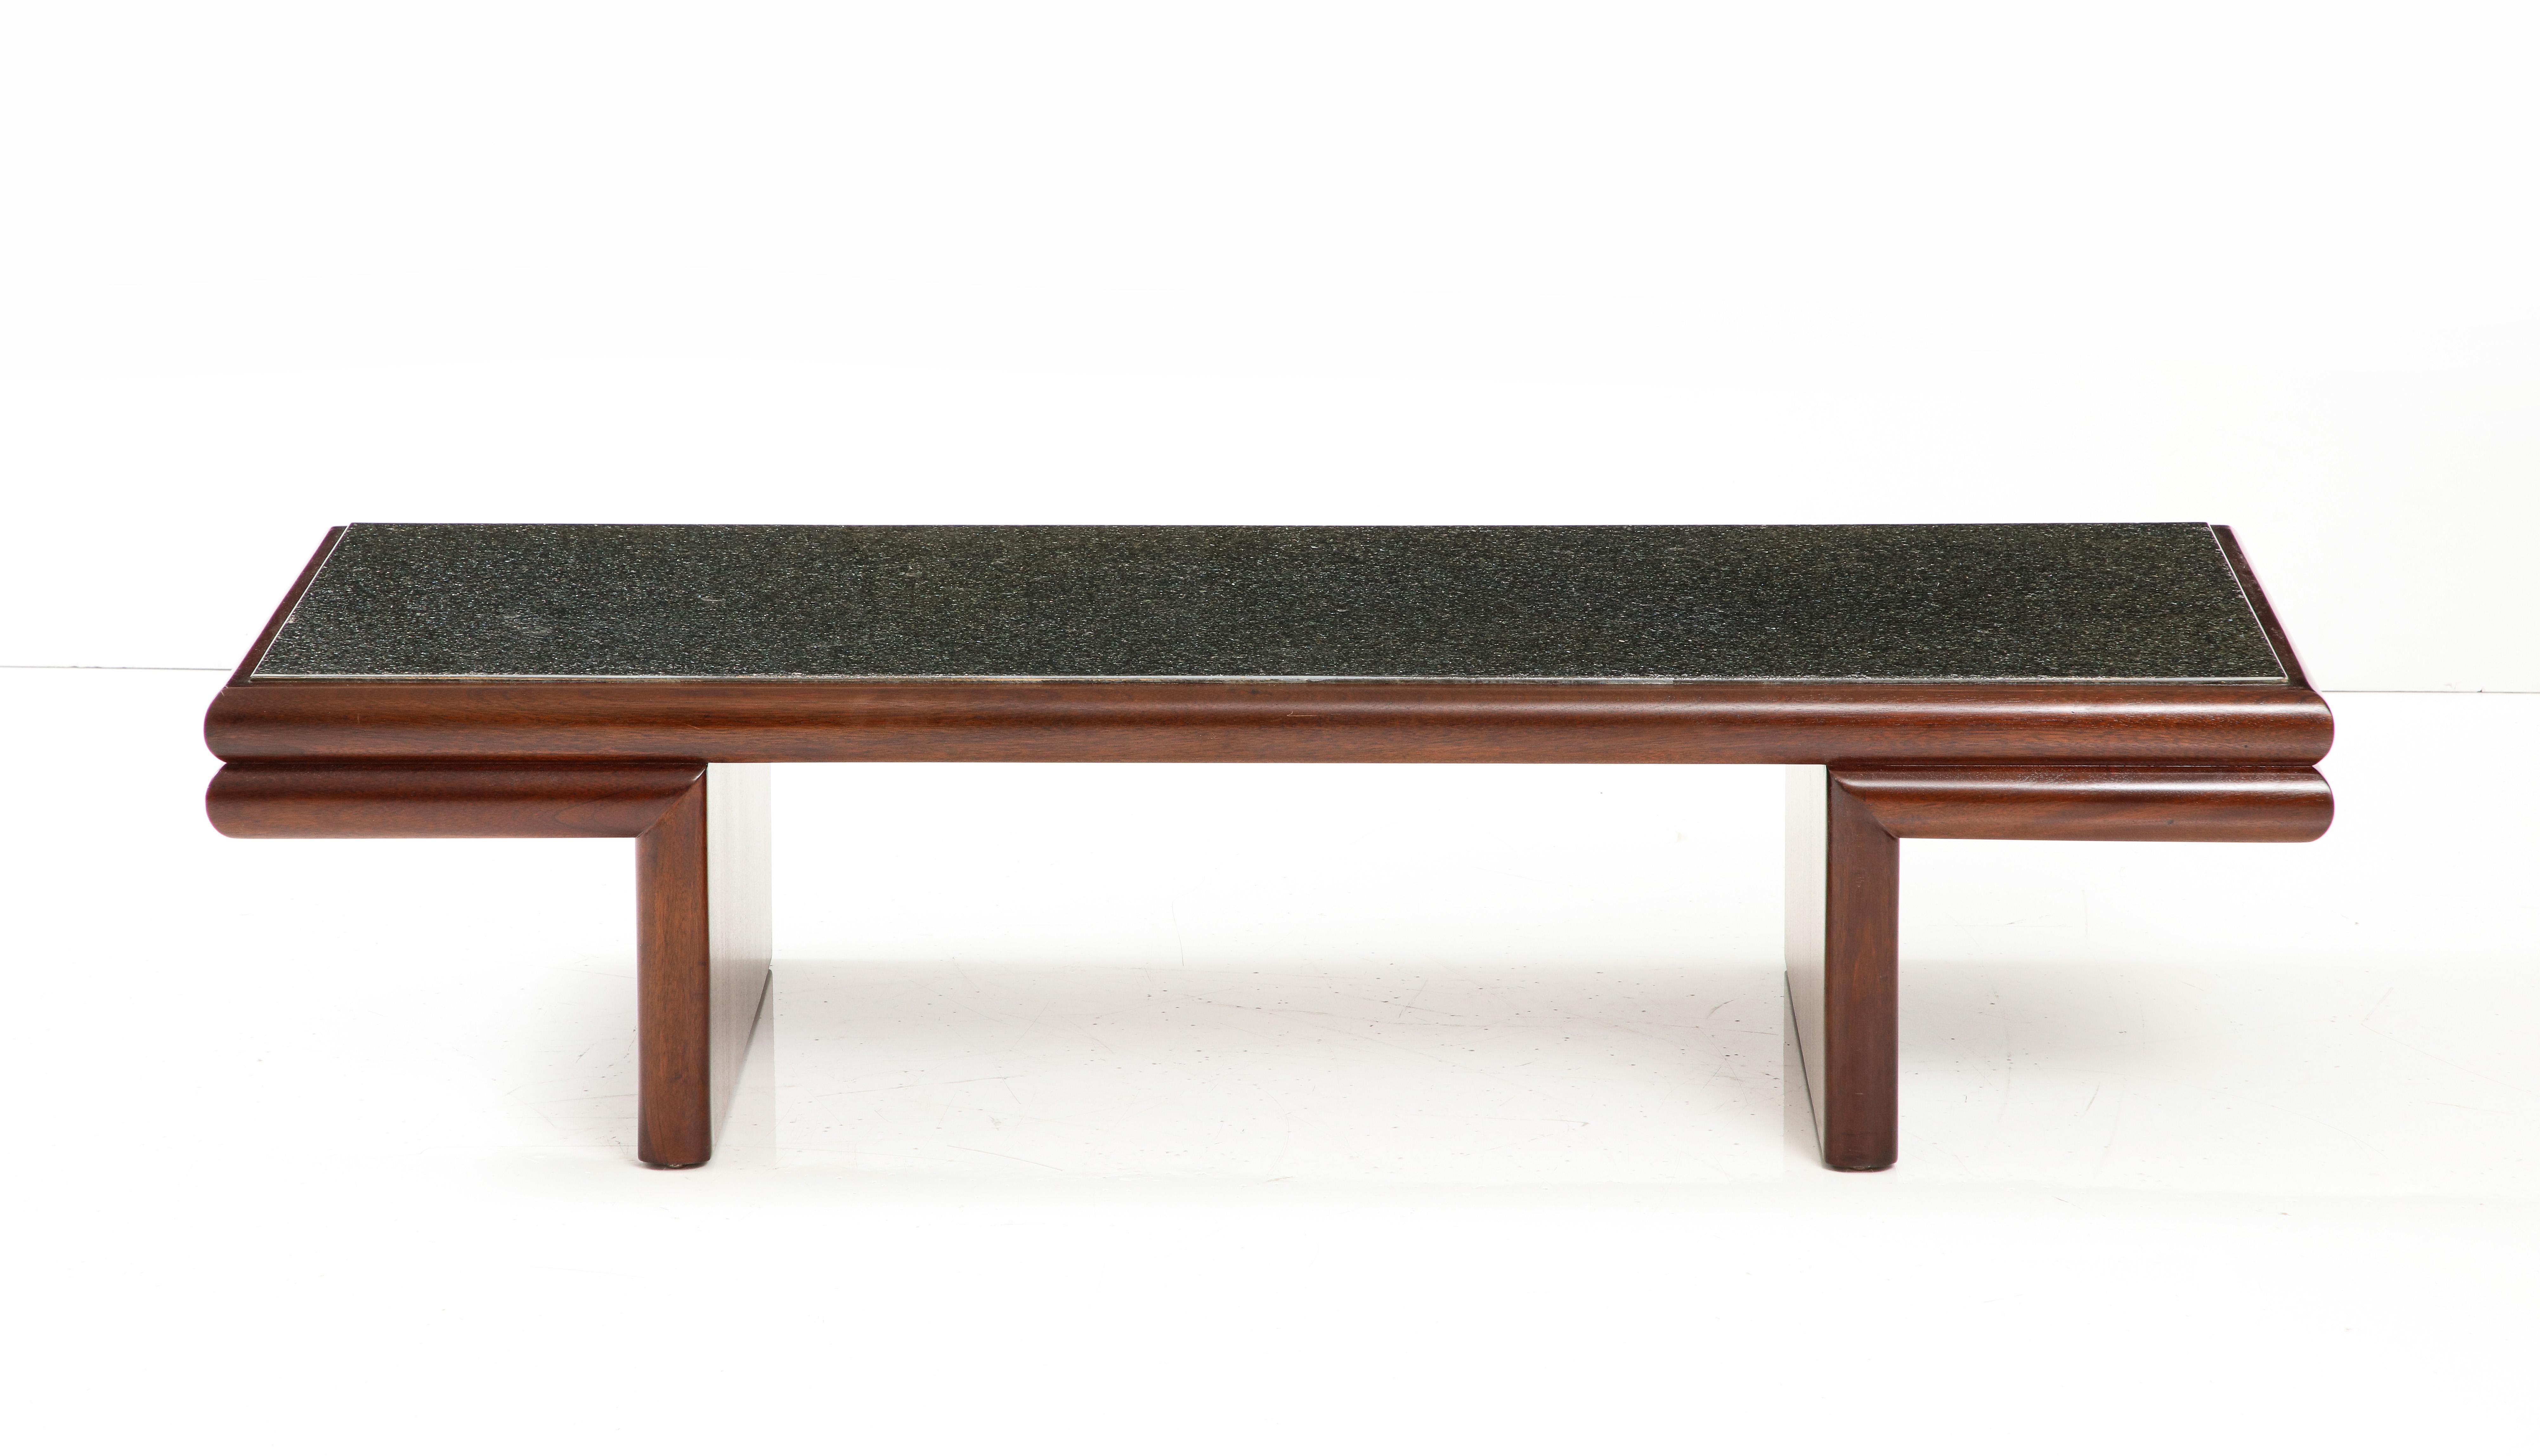 Amazing 1960's modernist well made and very heavy Mahogany coffee table with resin top designed by Harvey Probber, lightly restored with minor wear and patina due to age and use, there is a few scratches to the resin top.